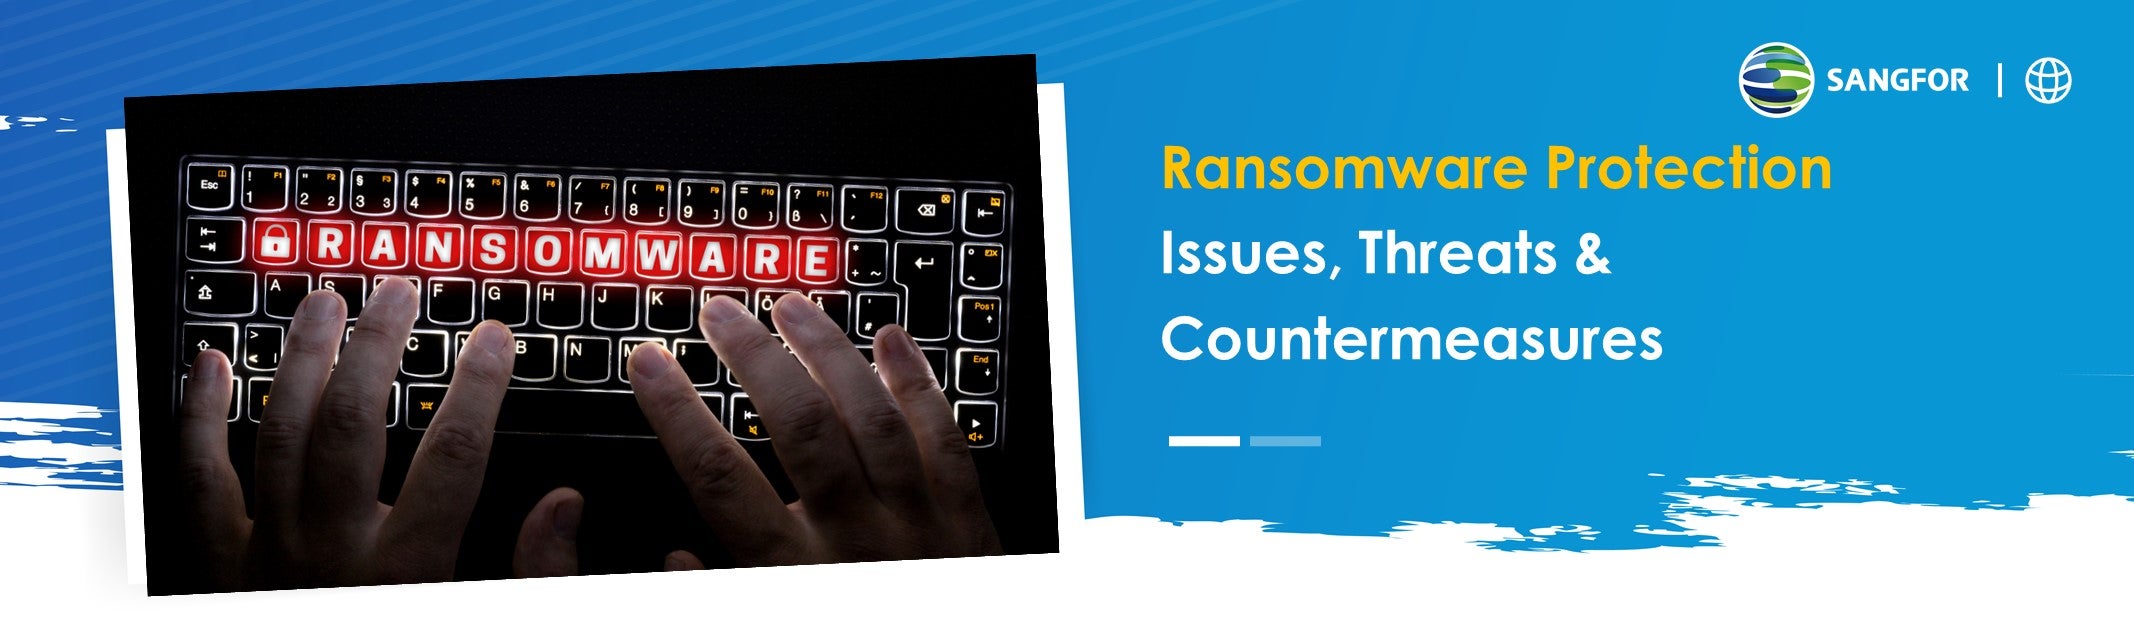 Ransomware Protection Issues Threats  Countermeasures Article